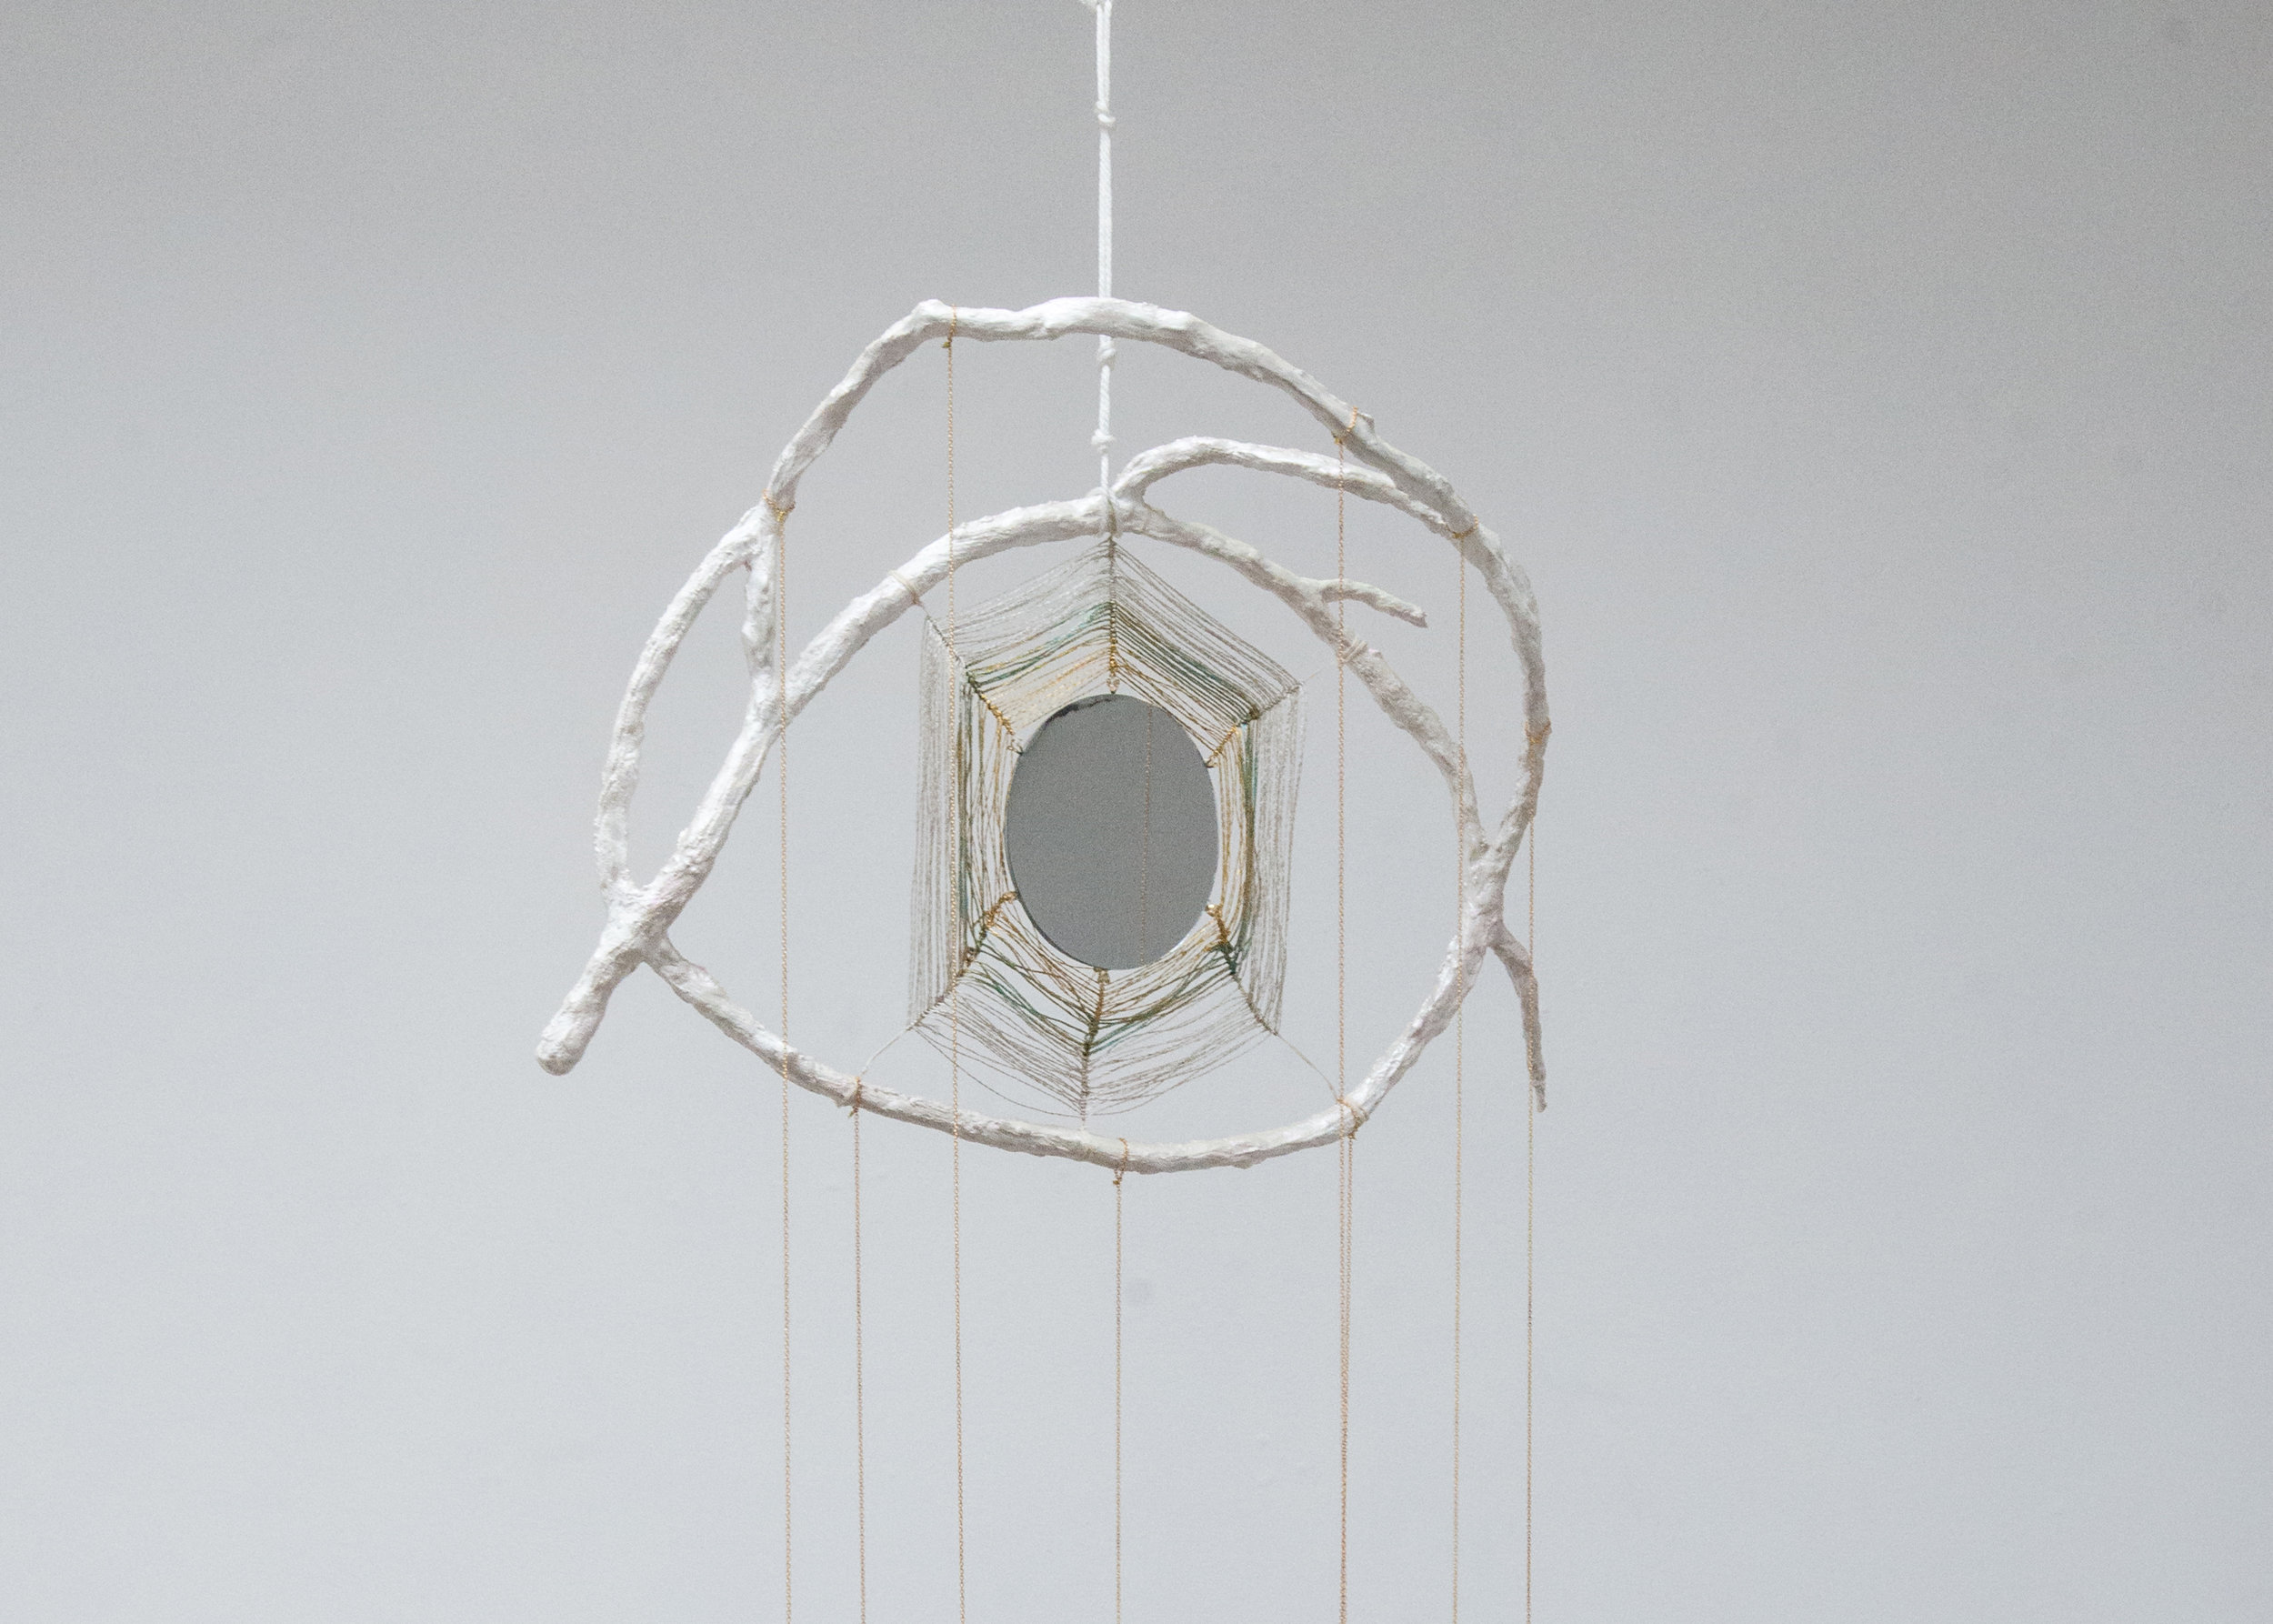  Mindy Rose Schwartz,  God’s Eye Makeup Mirror , 2018. Branch, resin, crystals, mirrors, thread, cord, chain and paint 